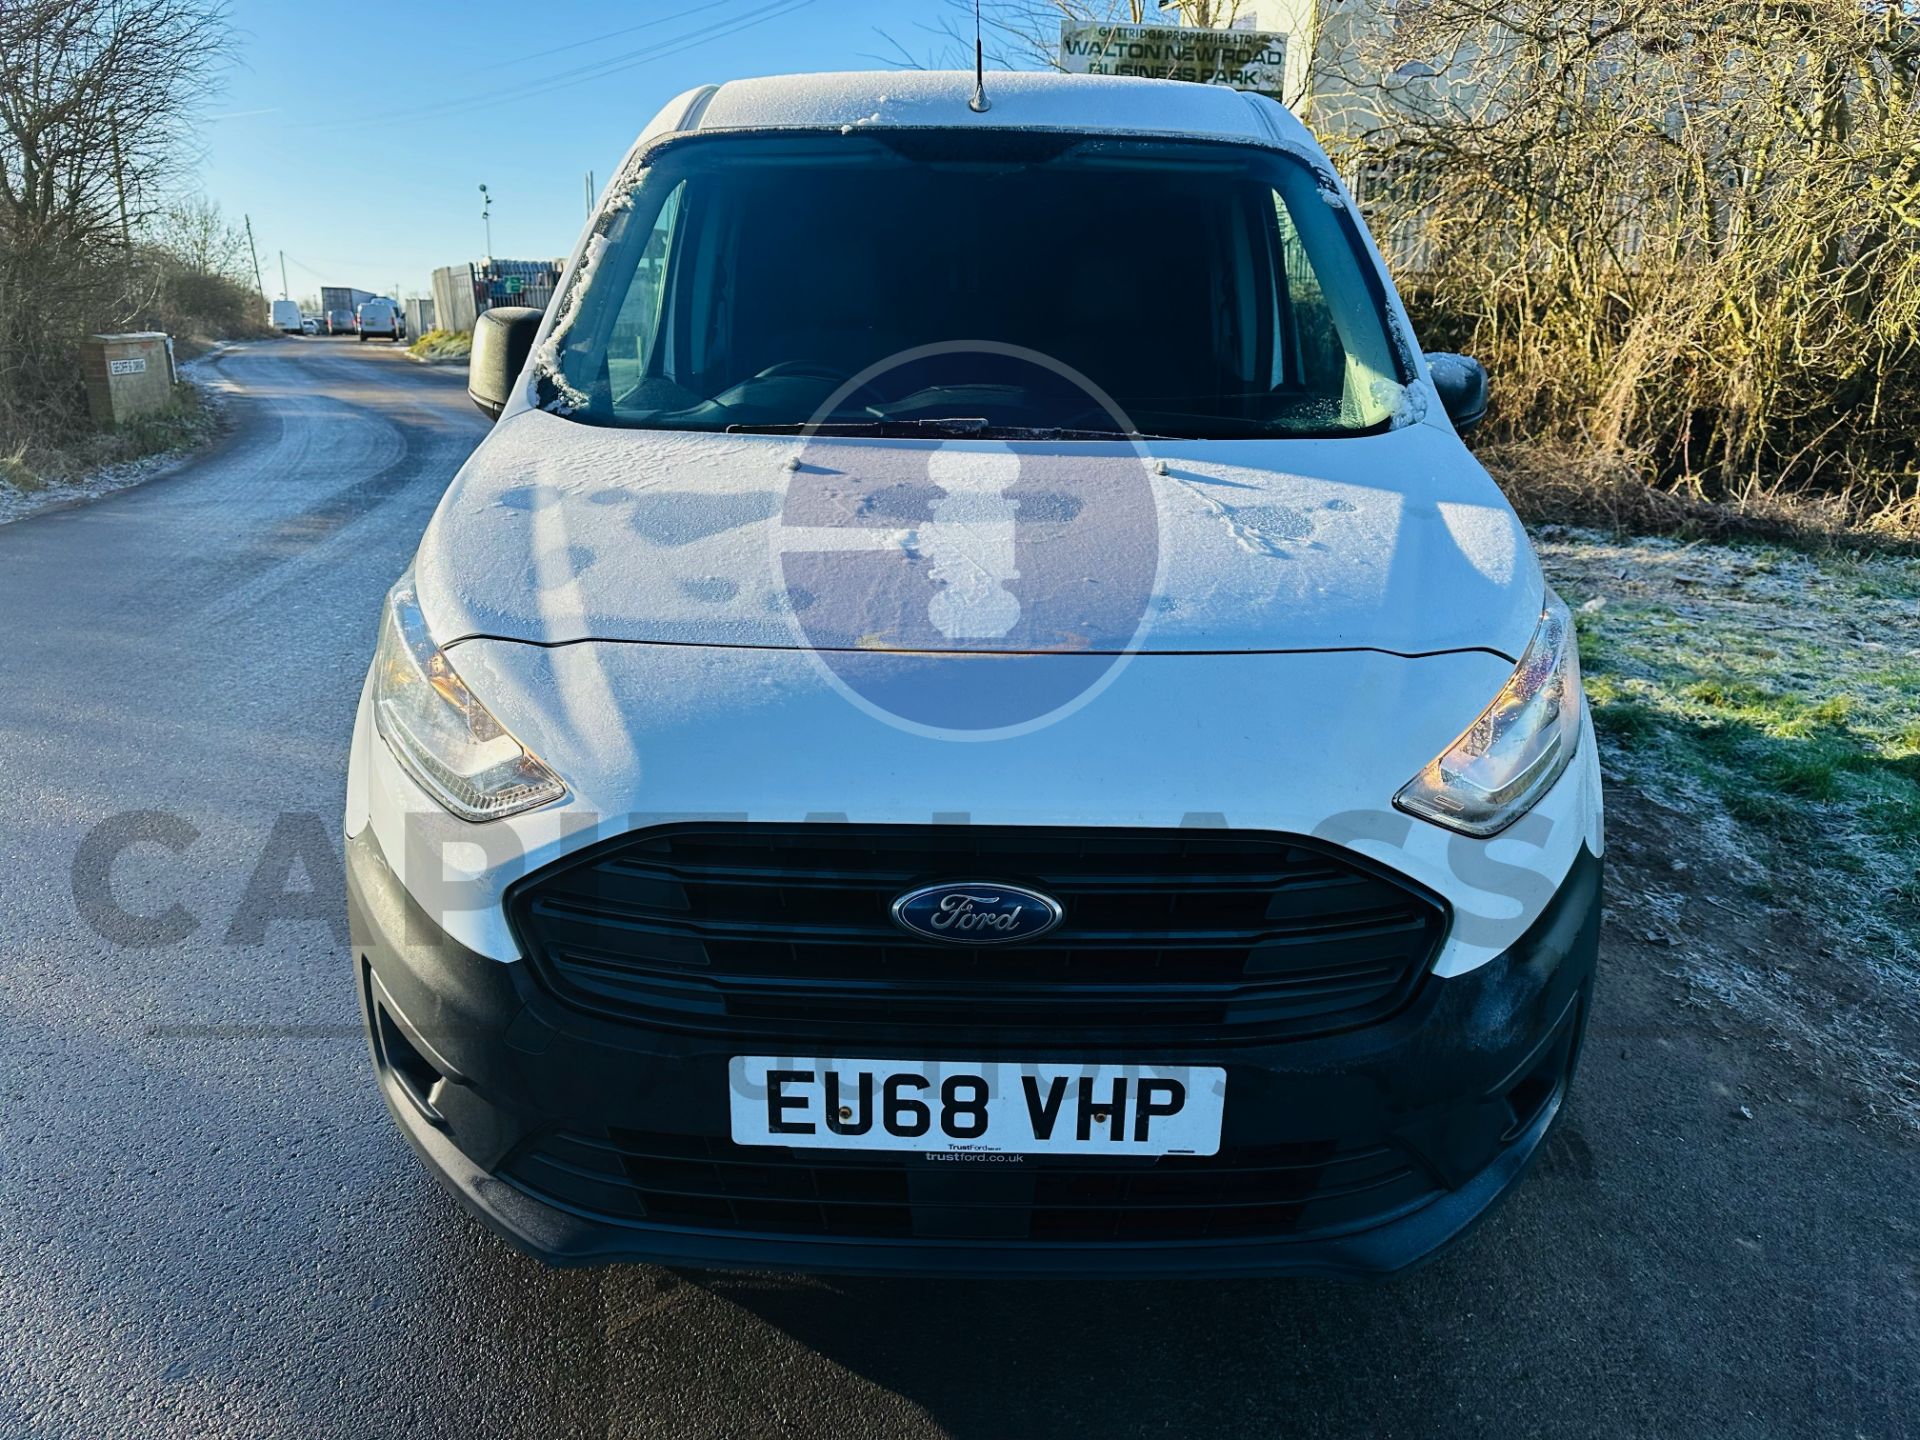 FORD TRANSIT CONNECT 1.5TDCI - 5 SEATER CREW VAN - 2019 MODEL - 1 OWNER FROM NEW - ULEZ COMPLIANT! - Image 3 of 32